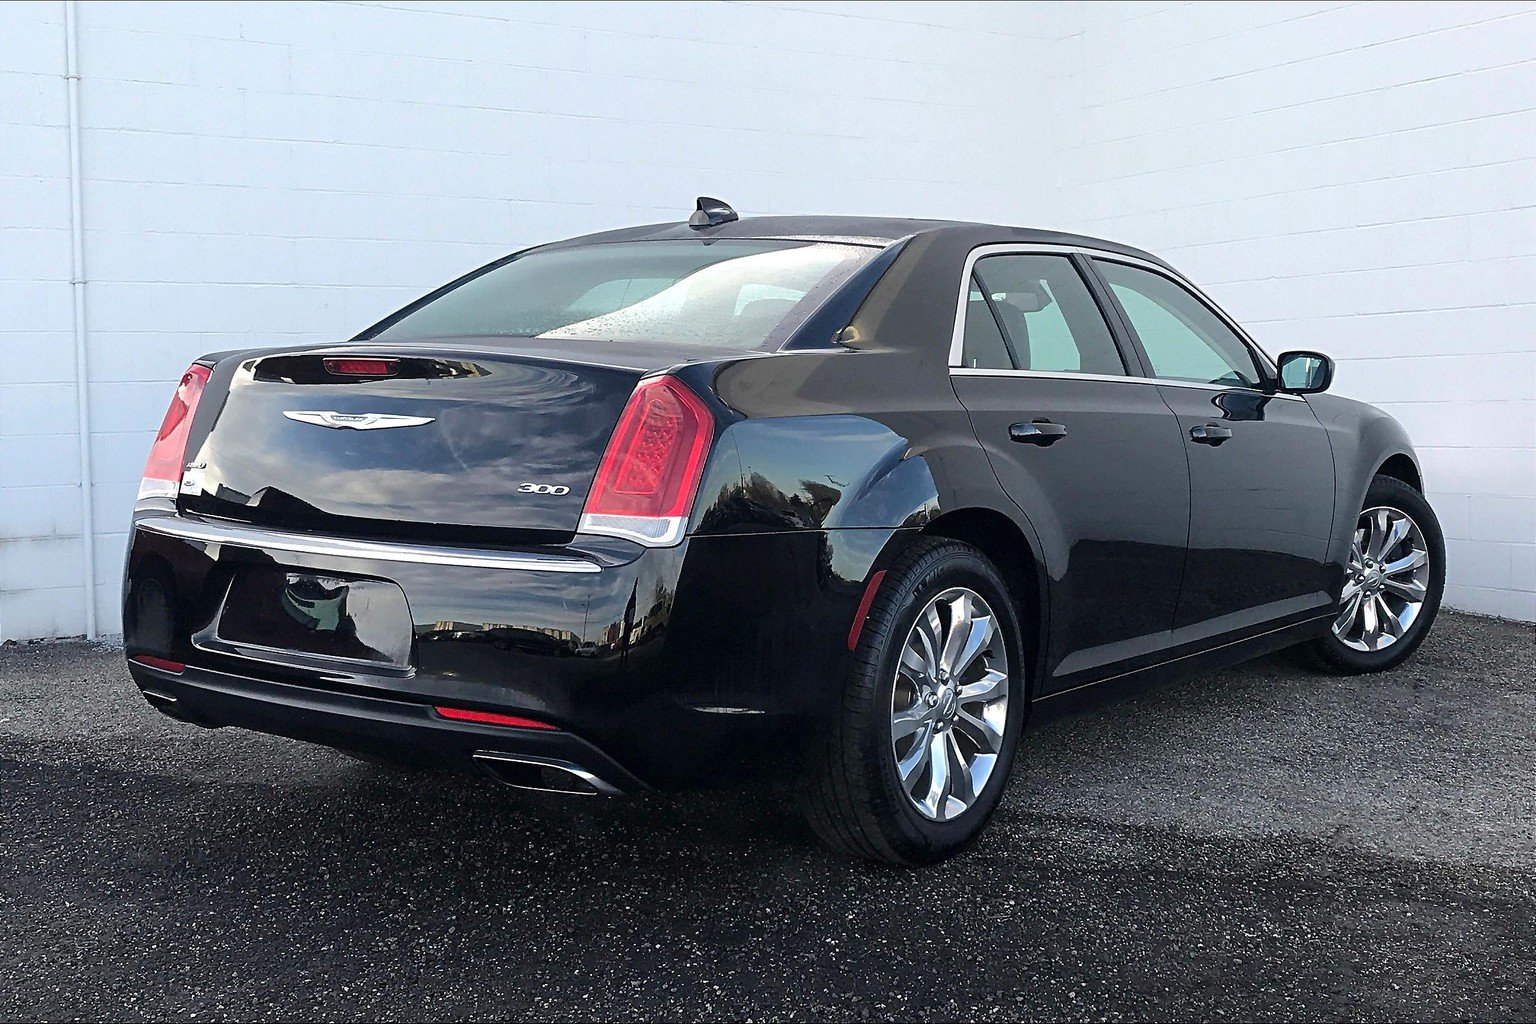 PreOwned 2016 Chrysler 300 4dr Sdn Anniversary Edition